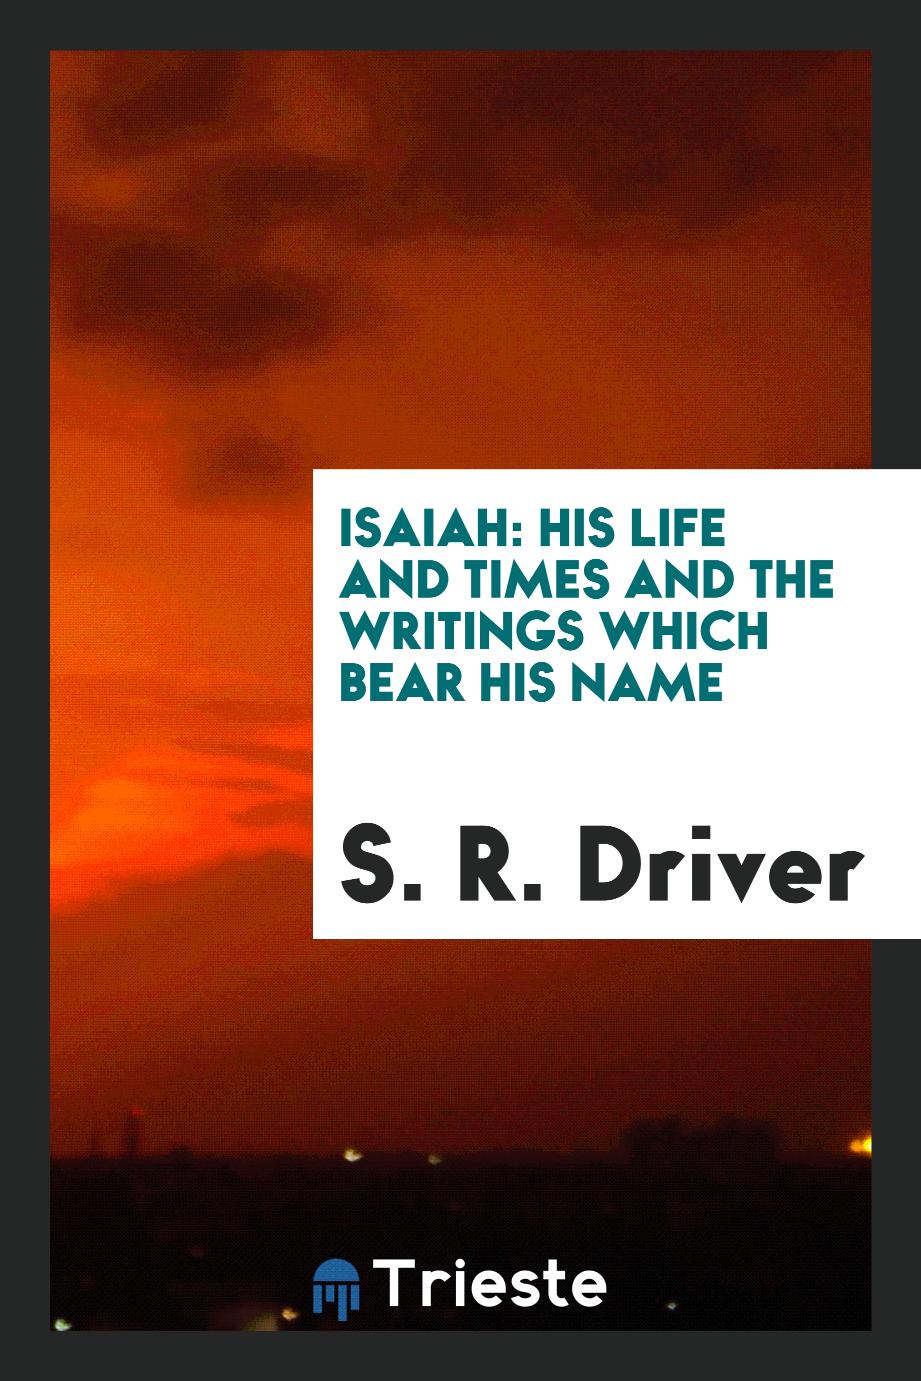 Isaiah: his life and times and the writings which bear his name